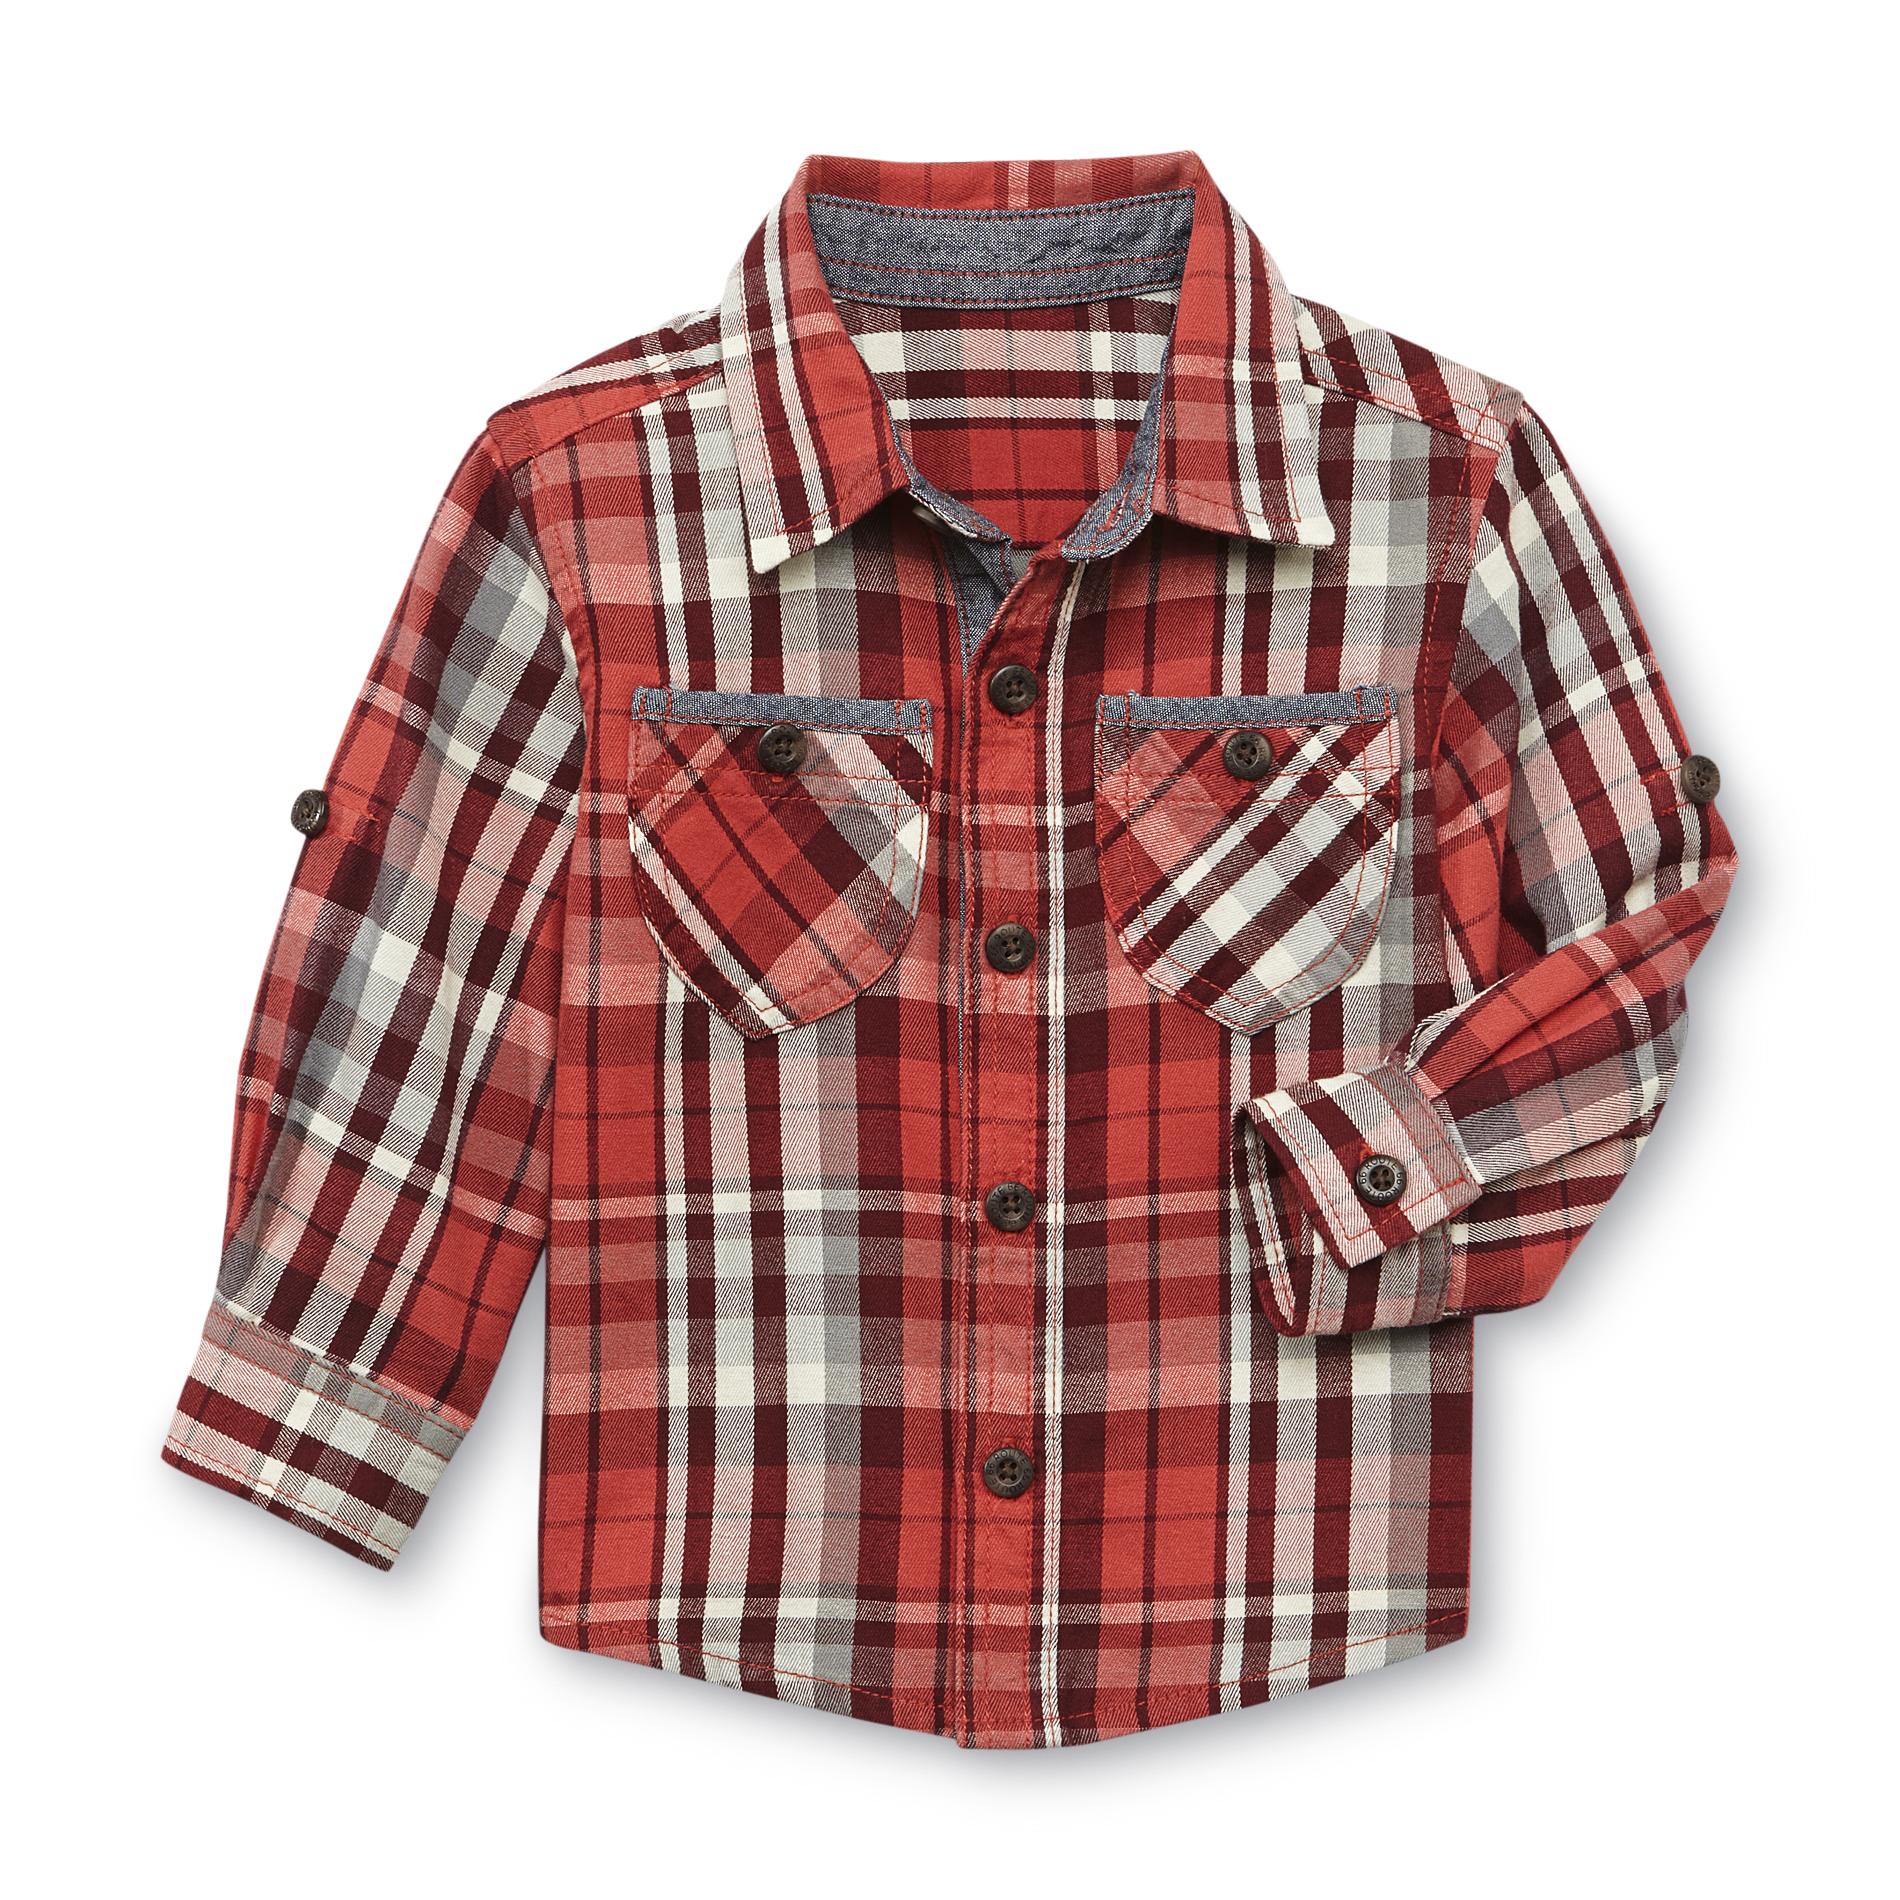 Route 66 Infant & Toddler Boy's Tab-Sleeve Shirt - Plaid